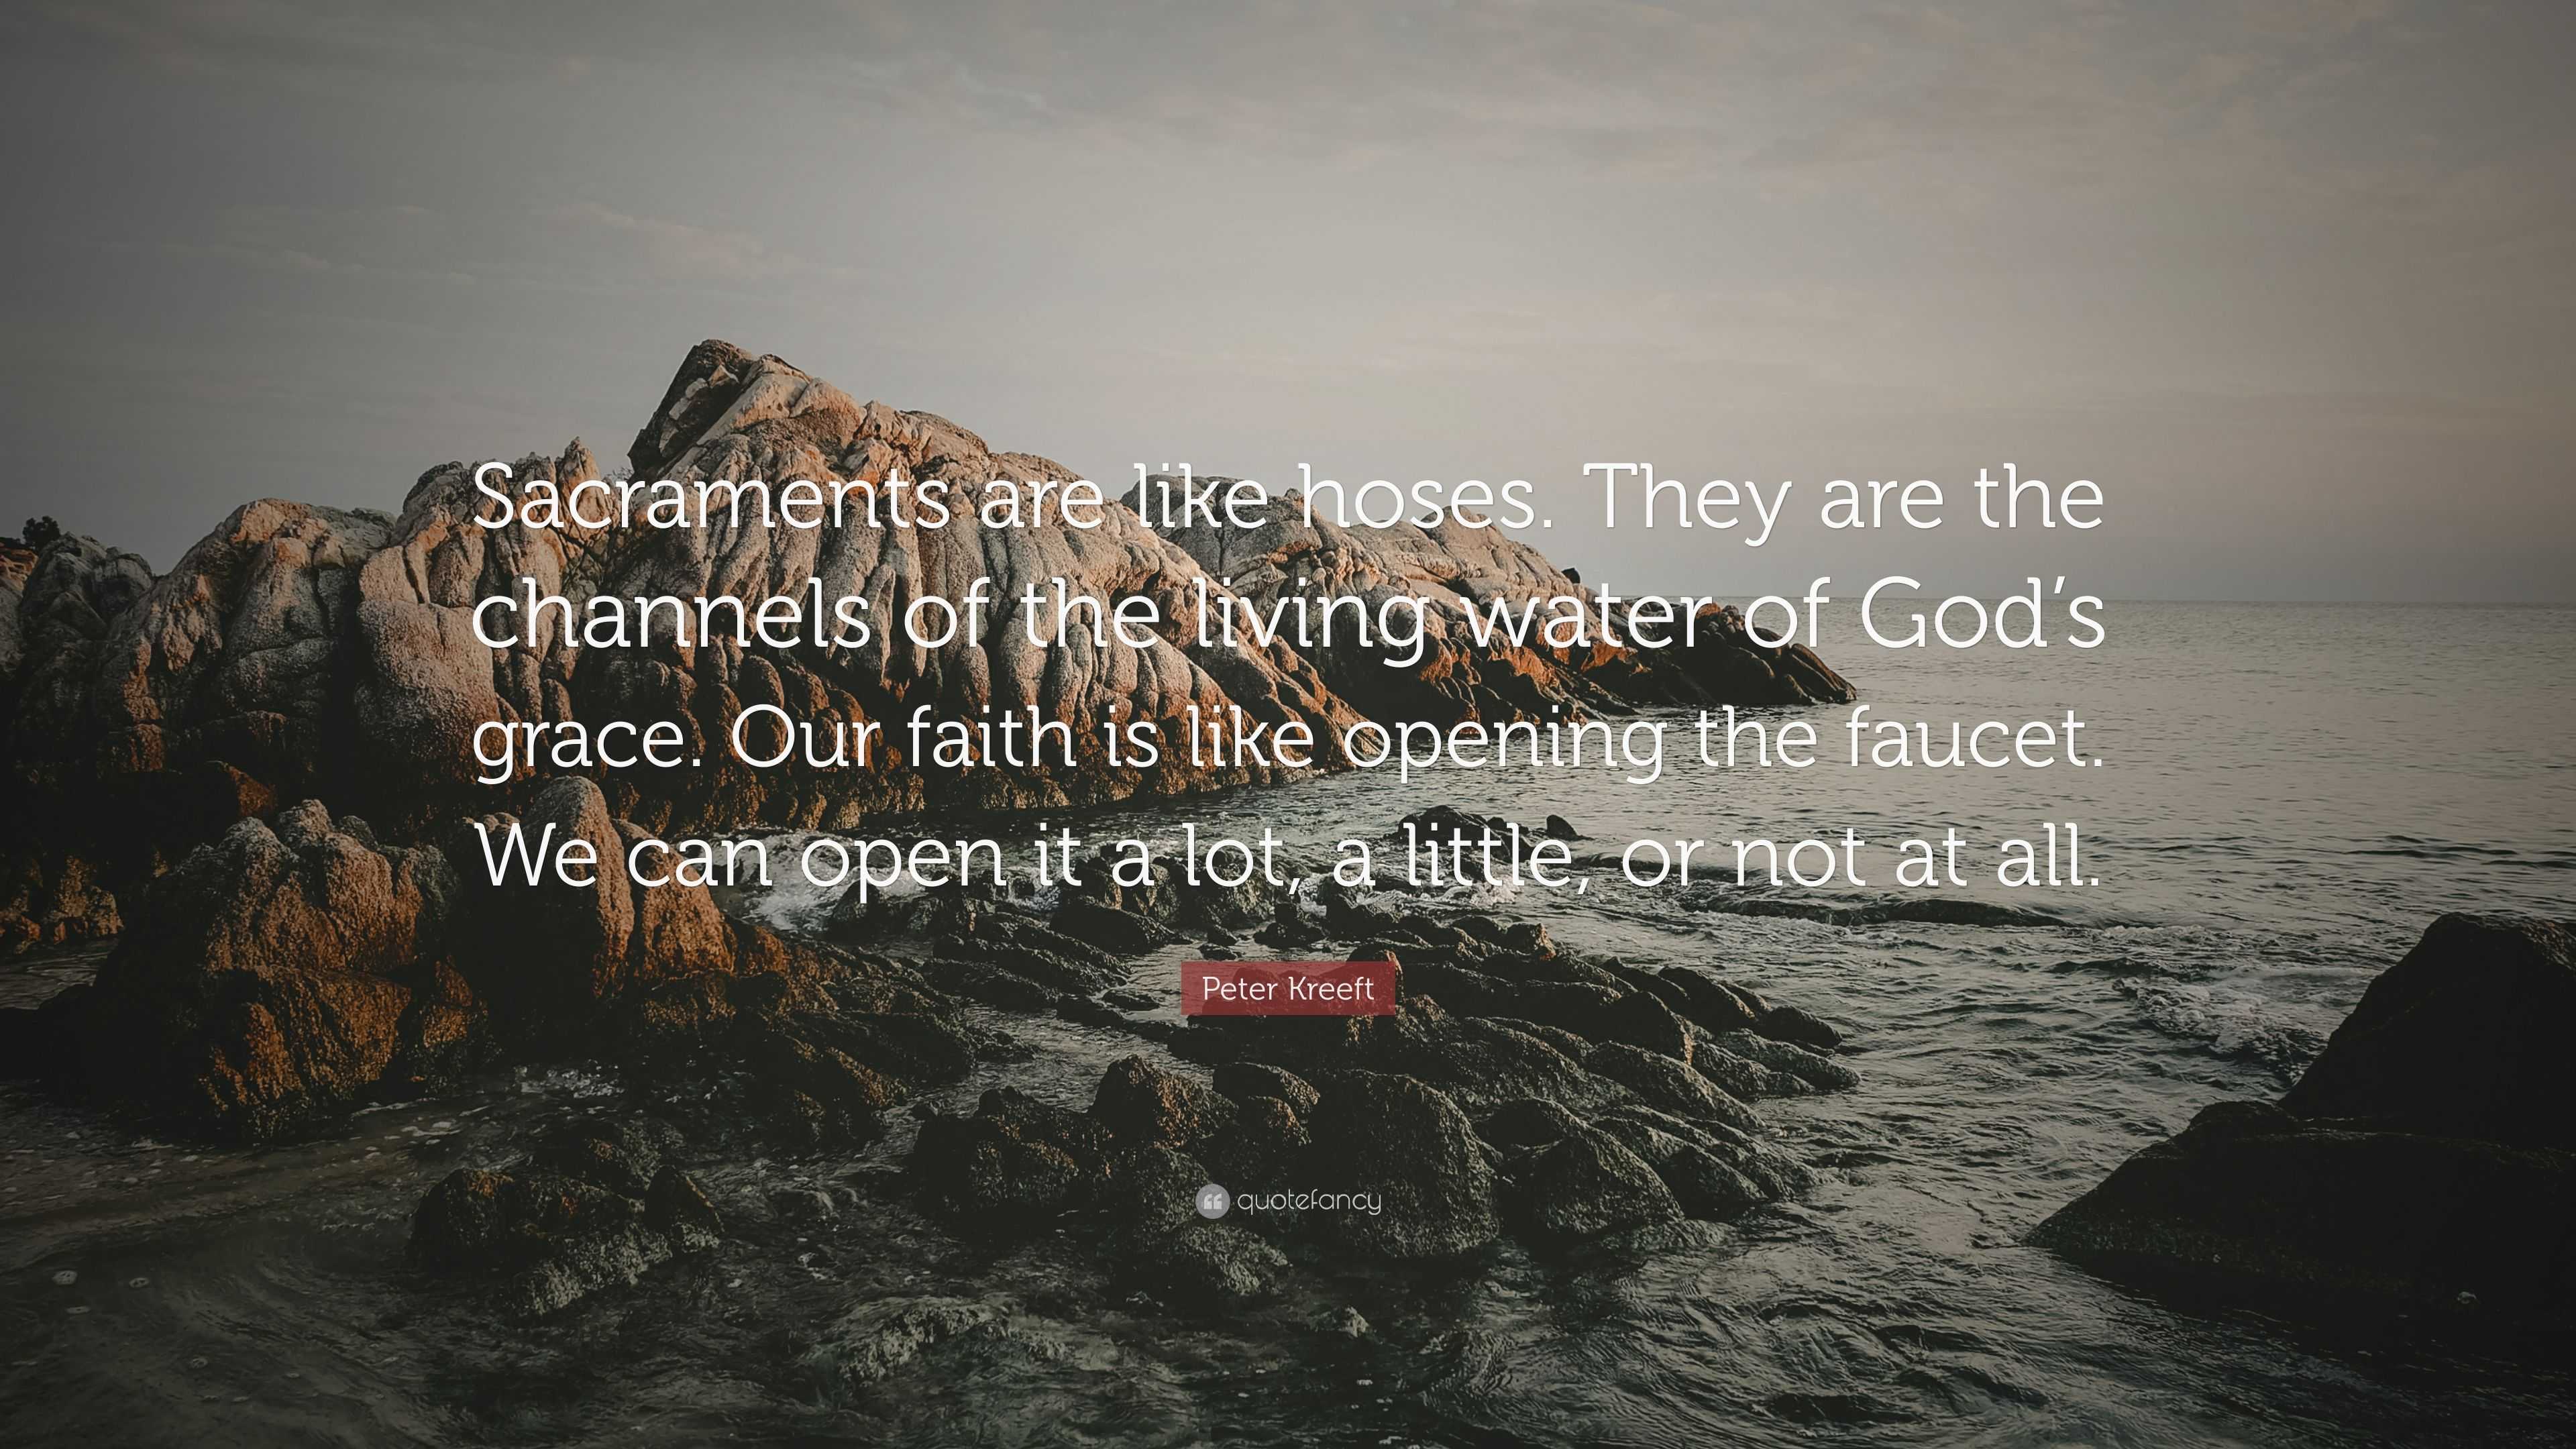 Peter Kreeft Quote: “Sacraments are like hoses. They are the channels ...